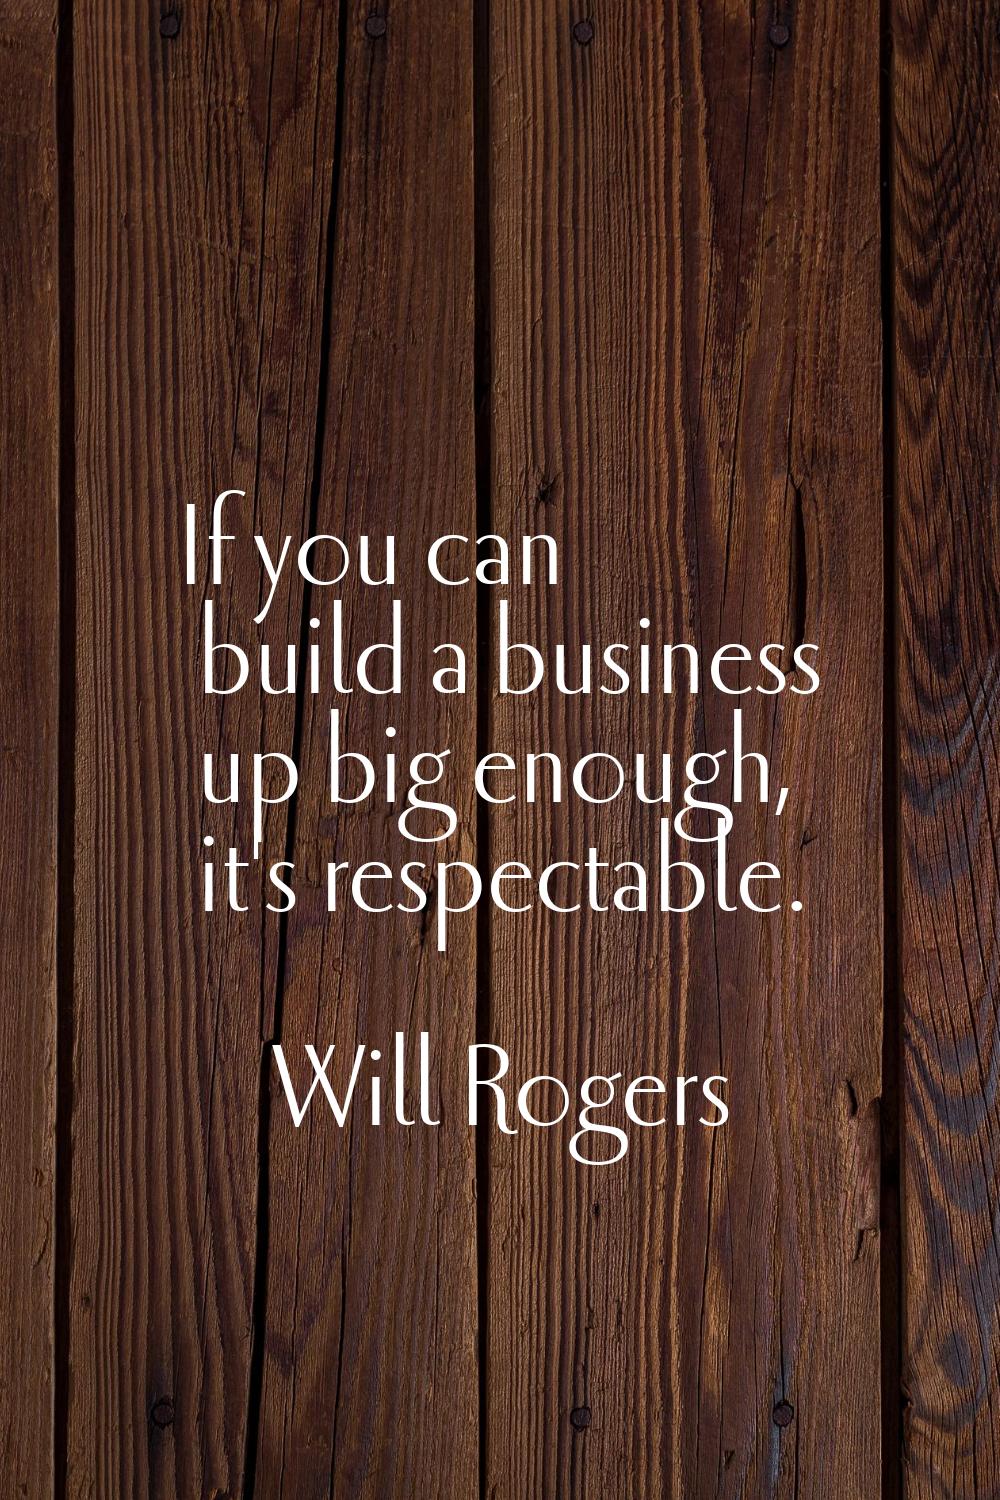 If you can build a business up big enough, it's respectable.